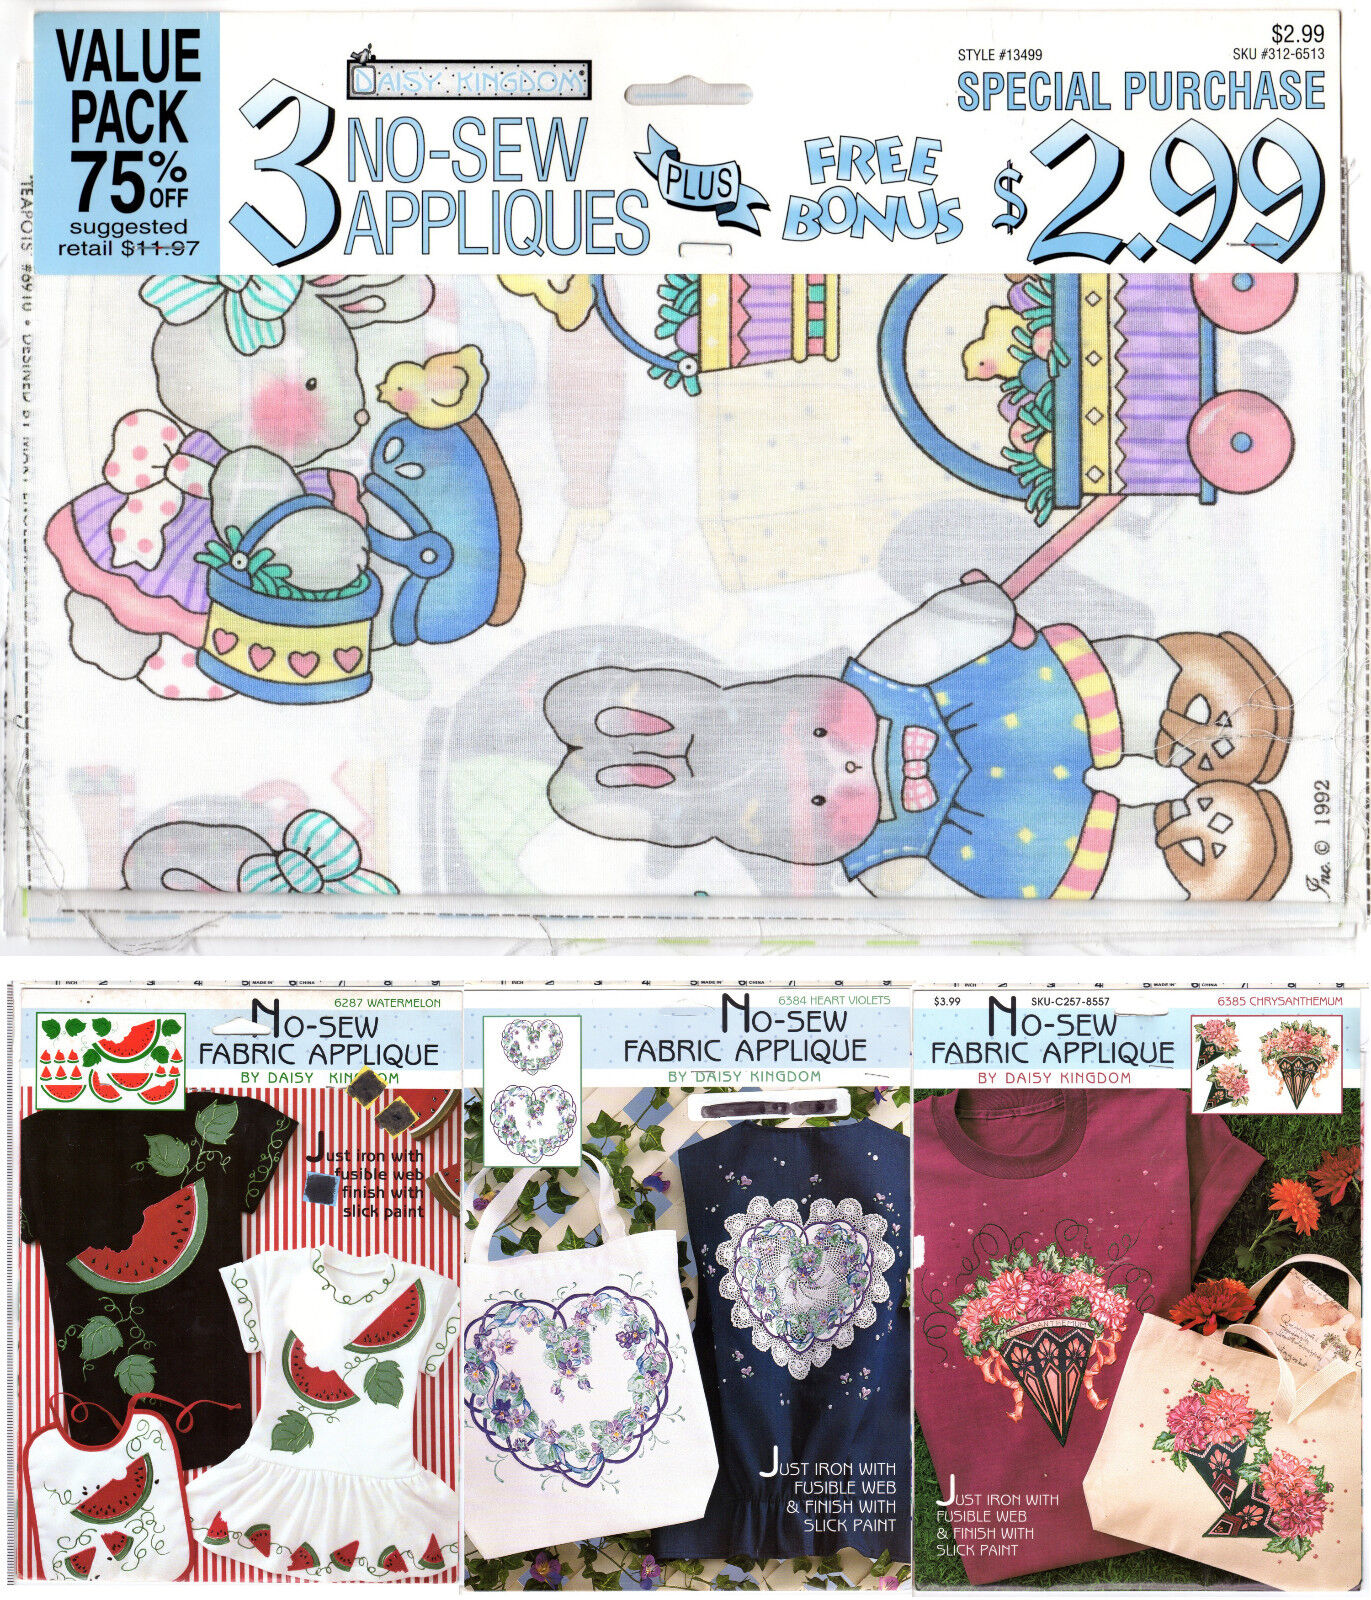 CHOICE: NEW Daisy Kingdom No-Sew Fabric Appliques Various Themes Add Fusible Web